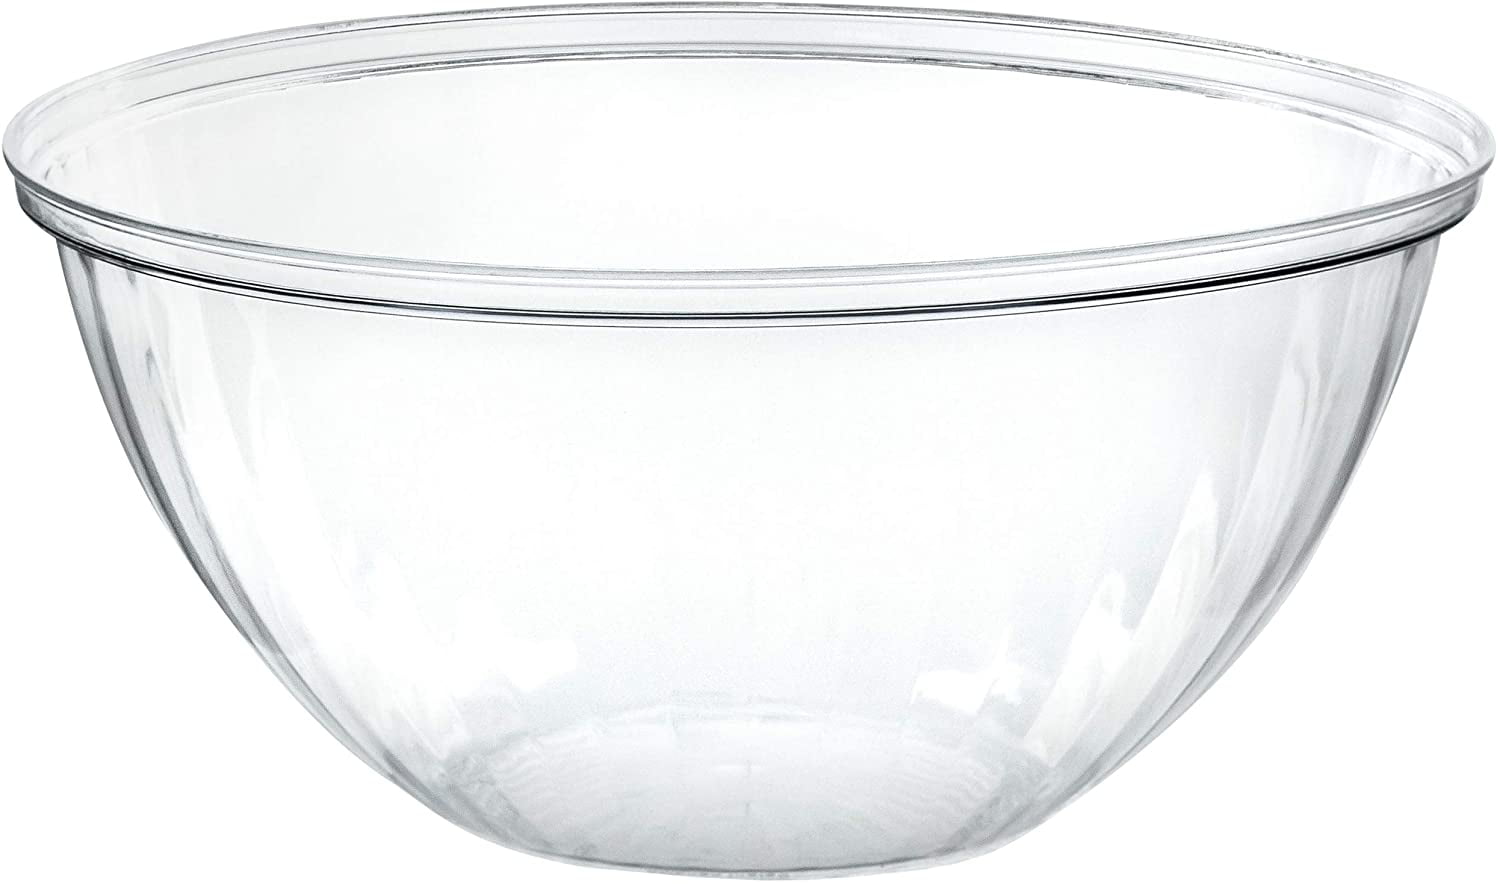 Reusable Elegant Extra Large Plastic or Salad Bowl Plasticpro Square Clear Texured Serving Bowls for Party Snack